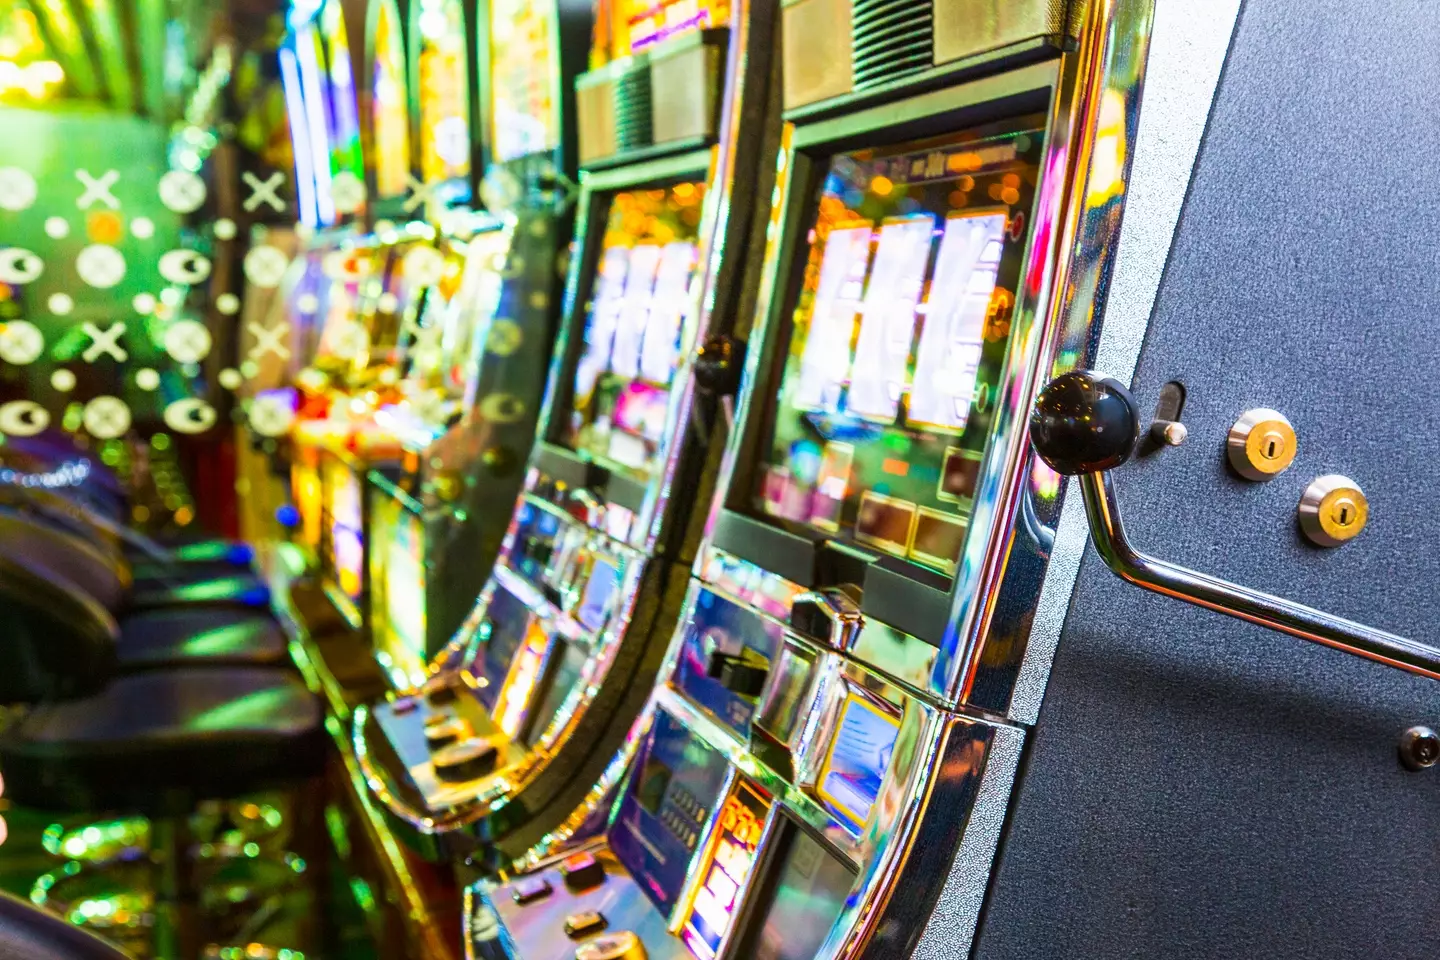 People have won big on the slots.